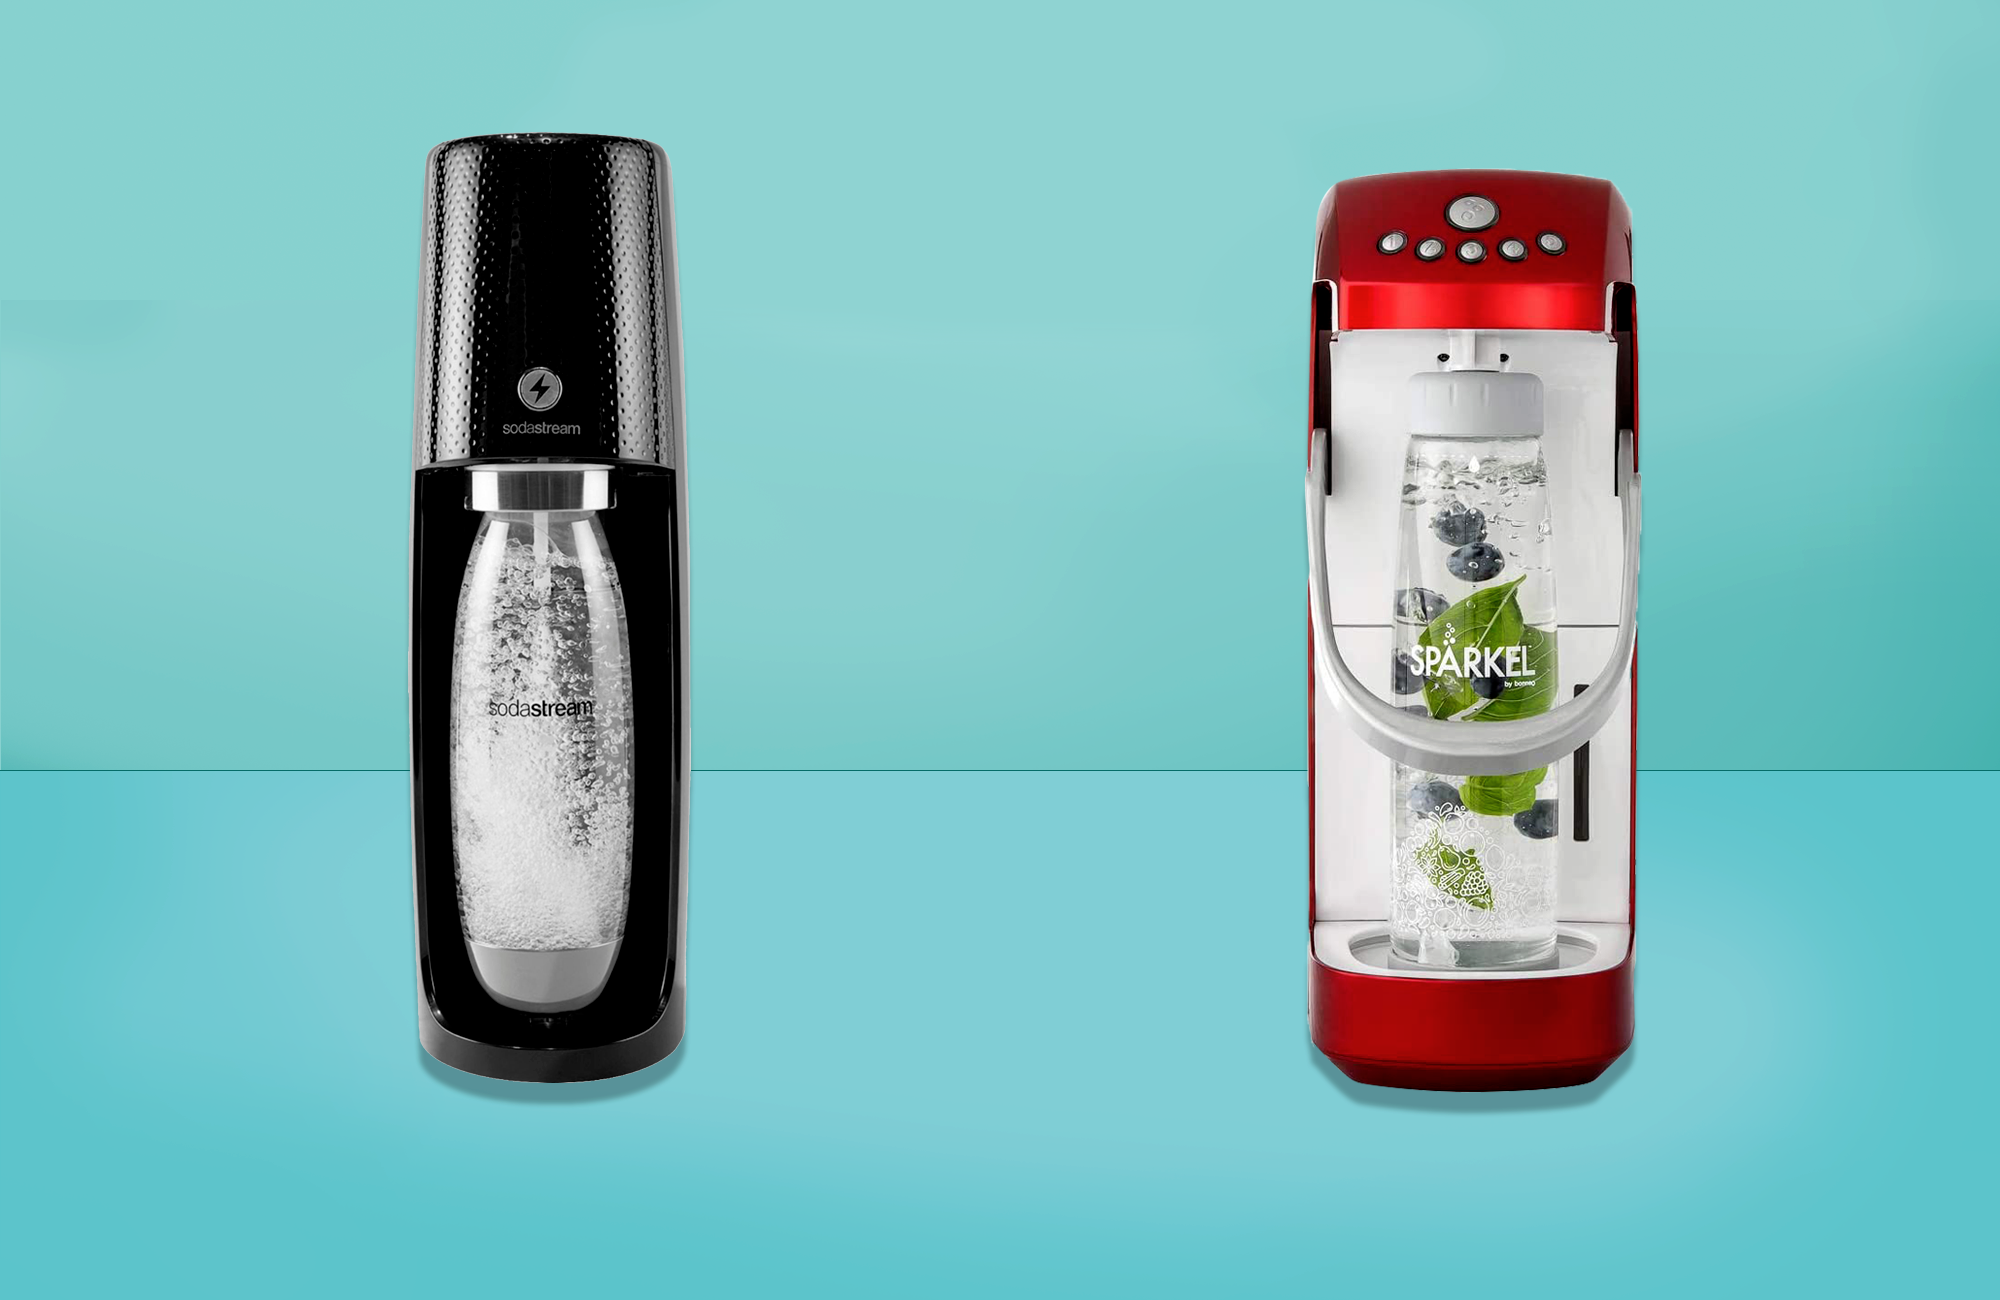 Ninja Thirsti Drink System Review - Is It Better Than SodaStream? 